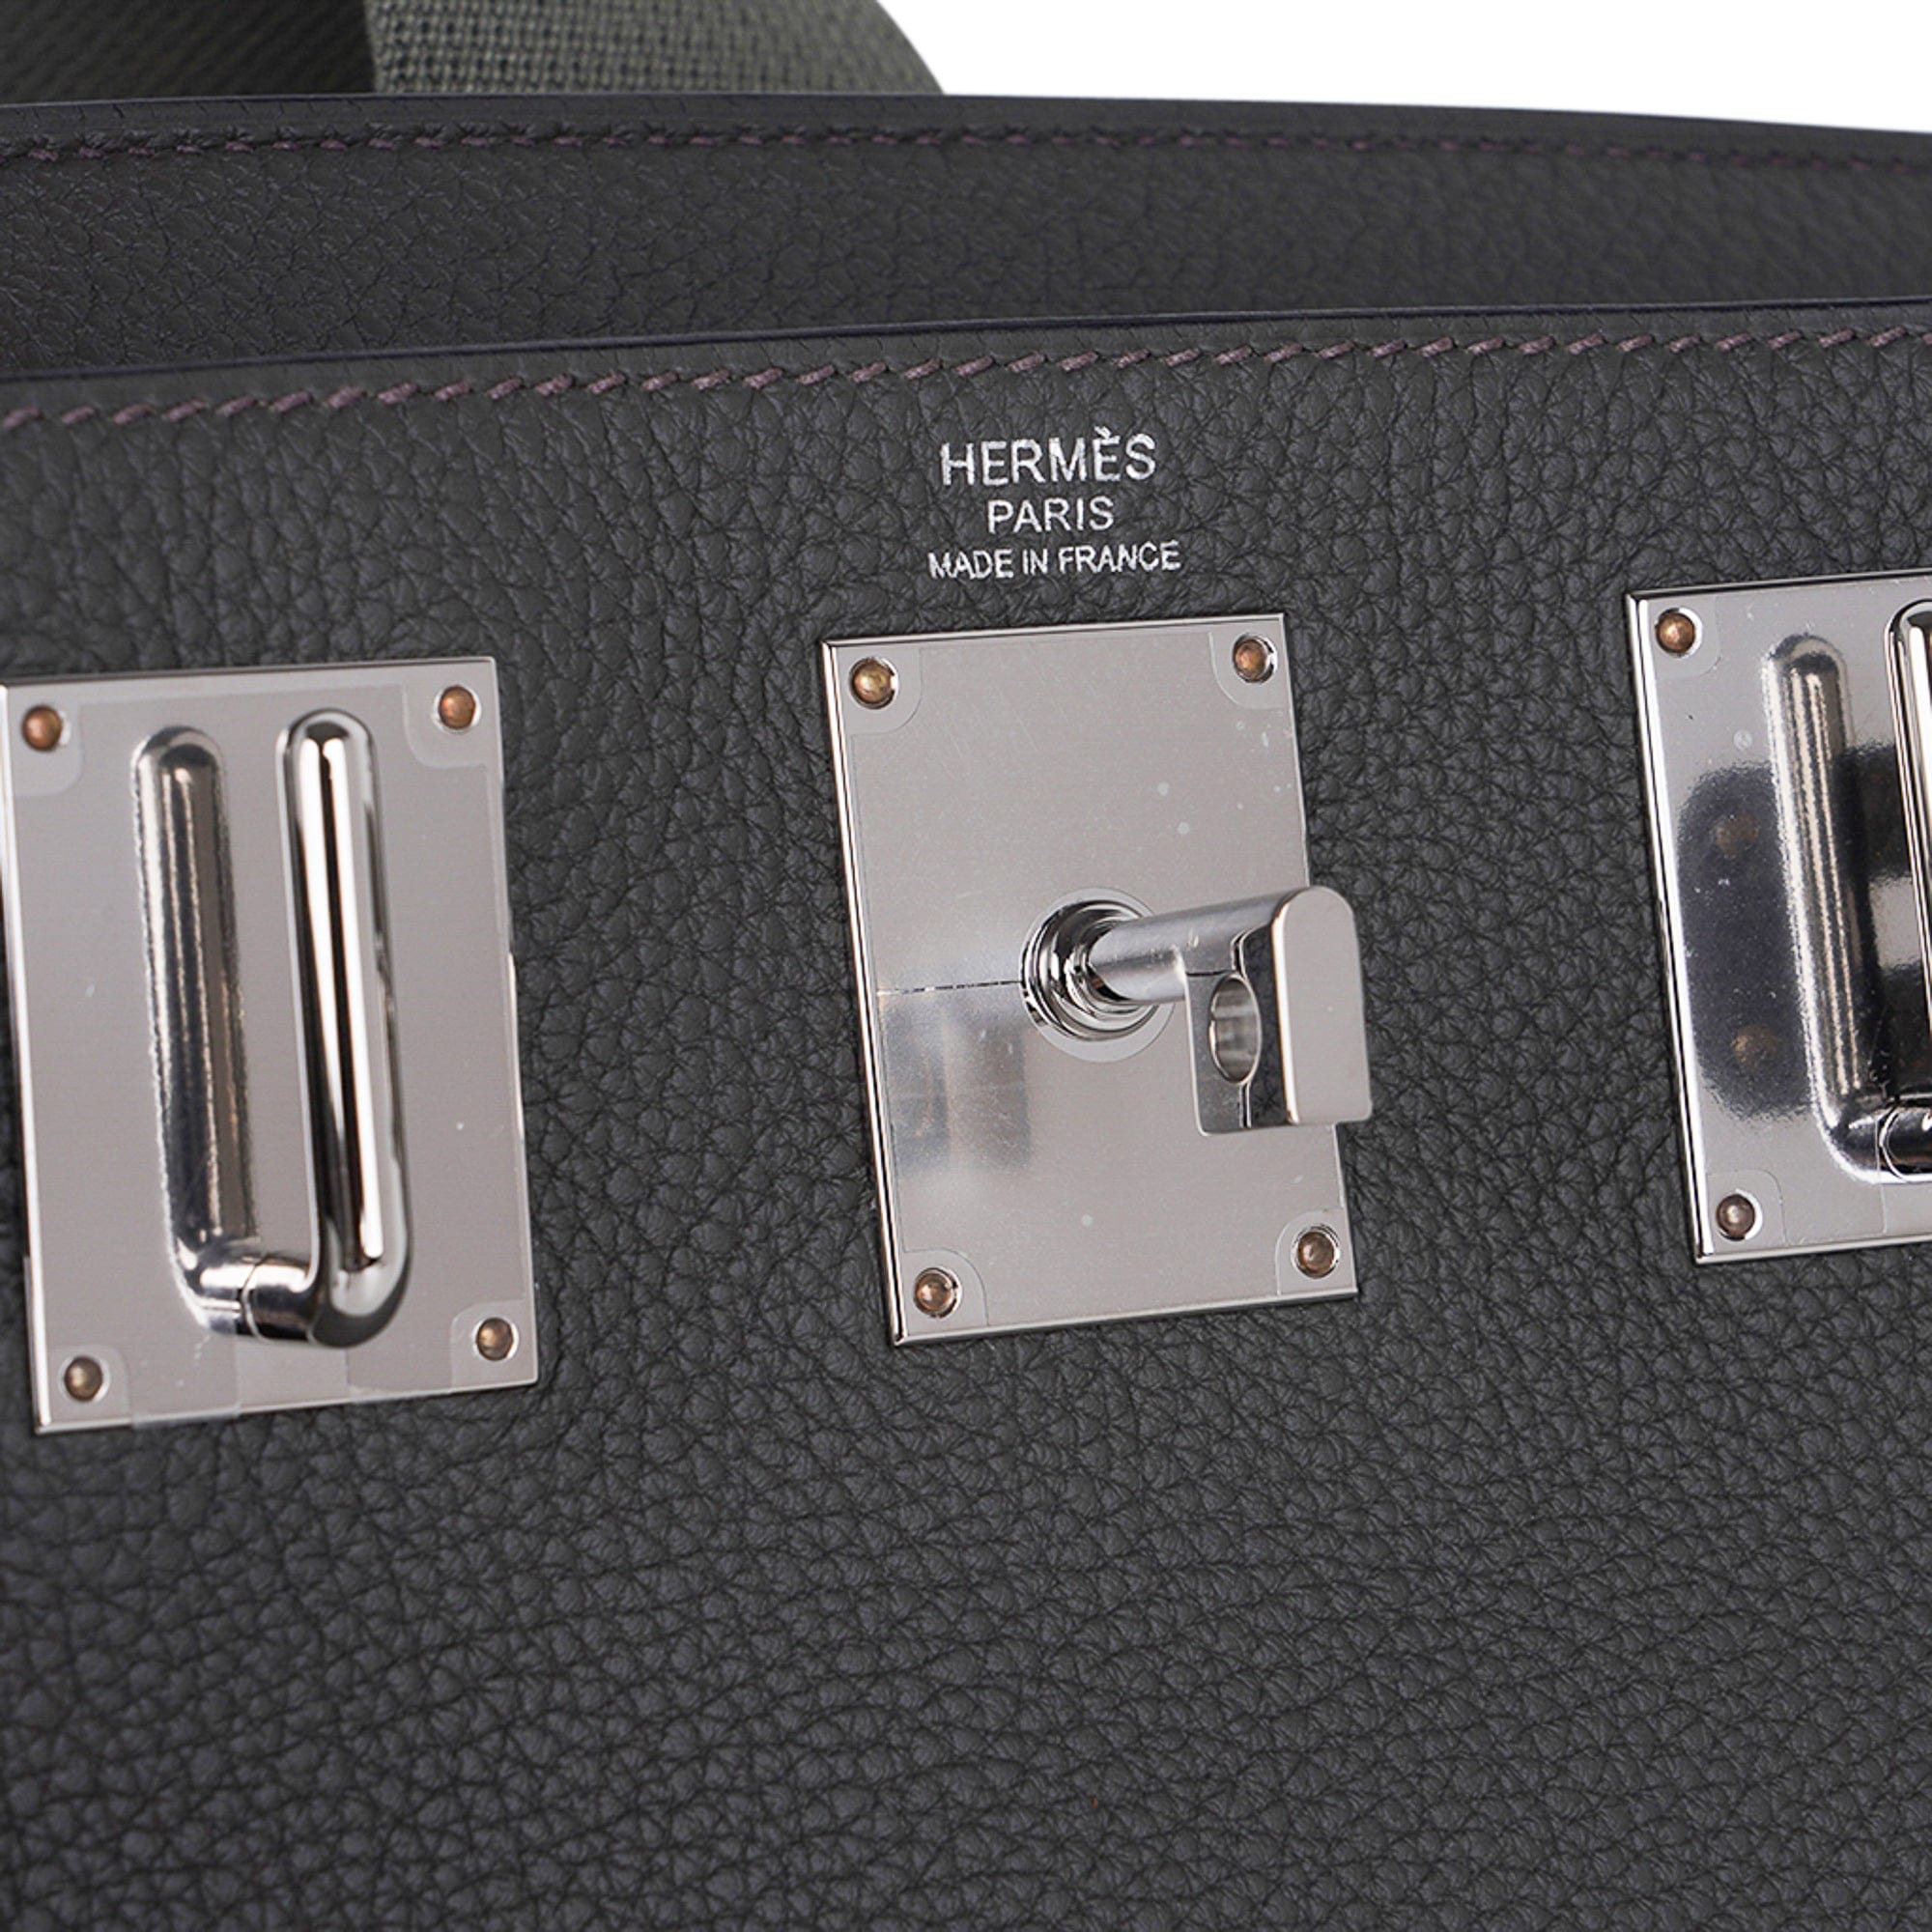 Shop HERMES Hac a Dos Backpacks (H083591CKM4) by LudivineBuyers